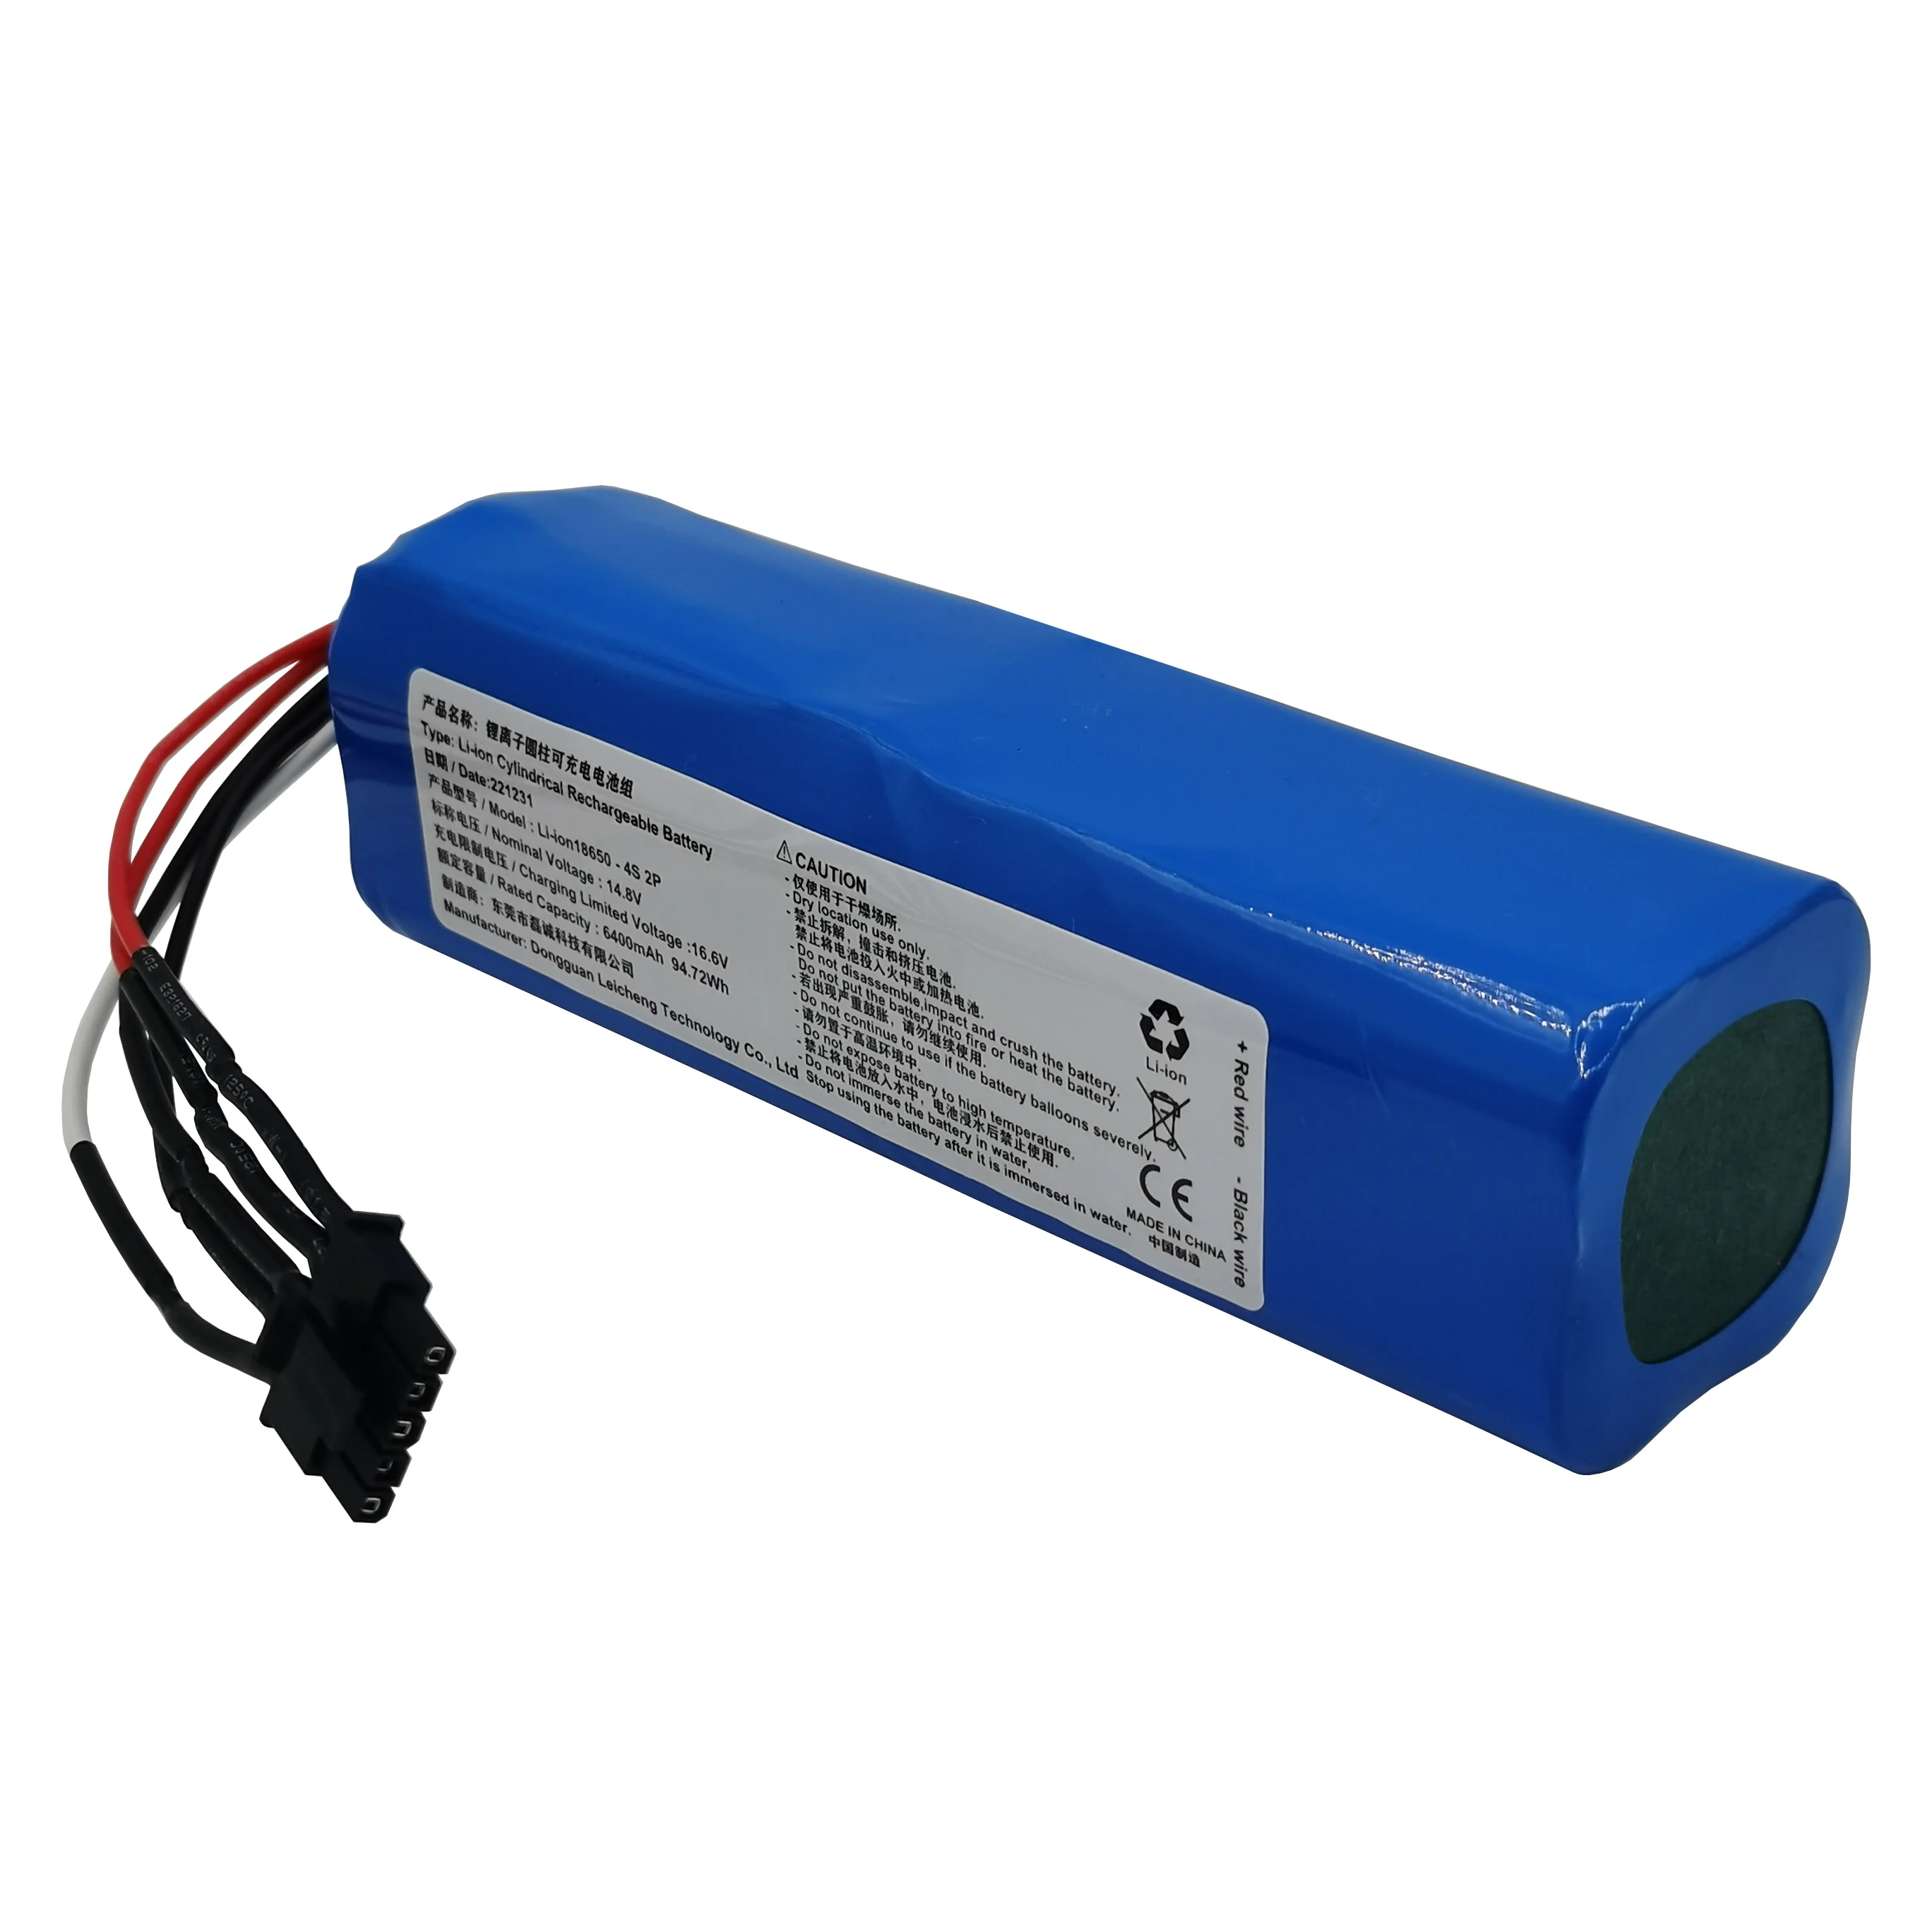 14.4V 14.8V 6400mAh Li-Ion Cylindrical Rechargeable Battery Pack 4S 2P For CONGA  9090 8090 Robot Vacuum Cleaner New Customizable